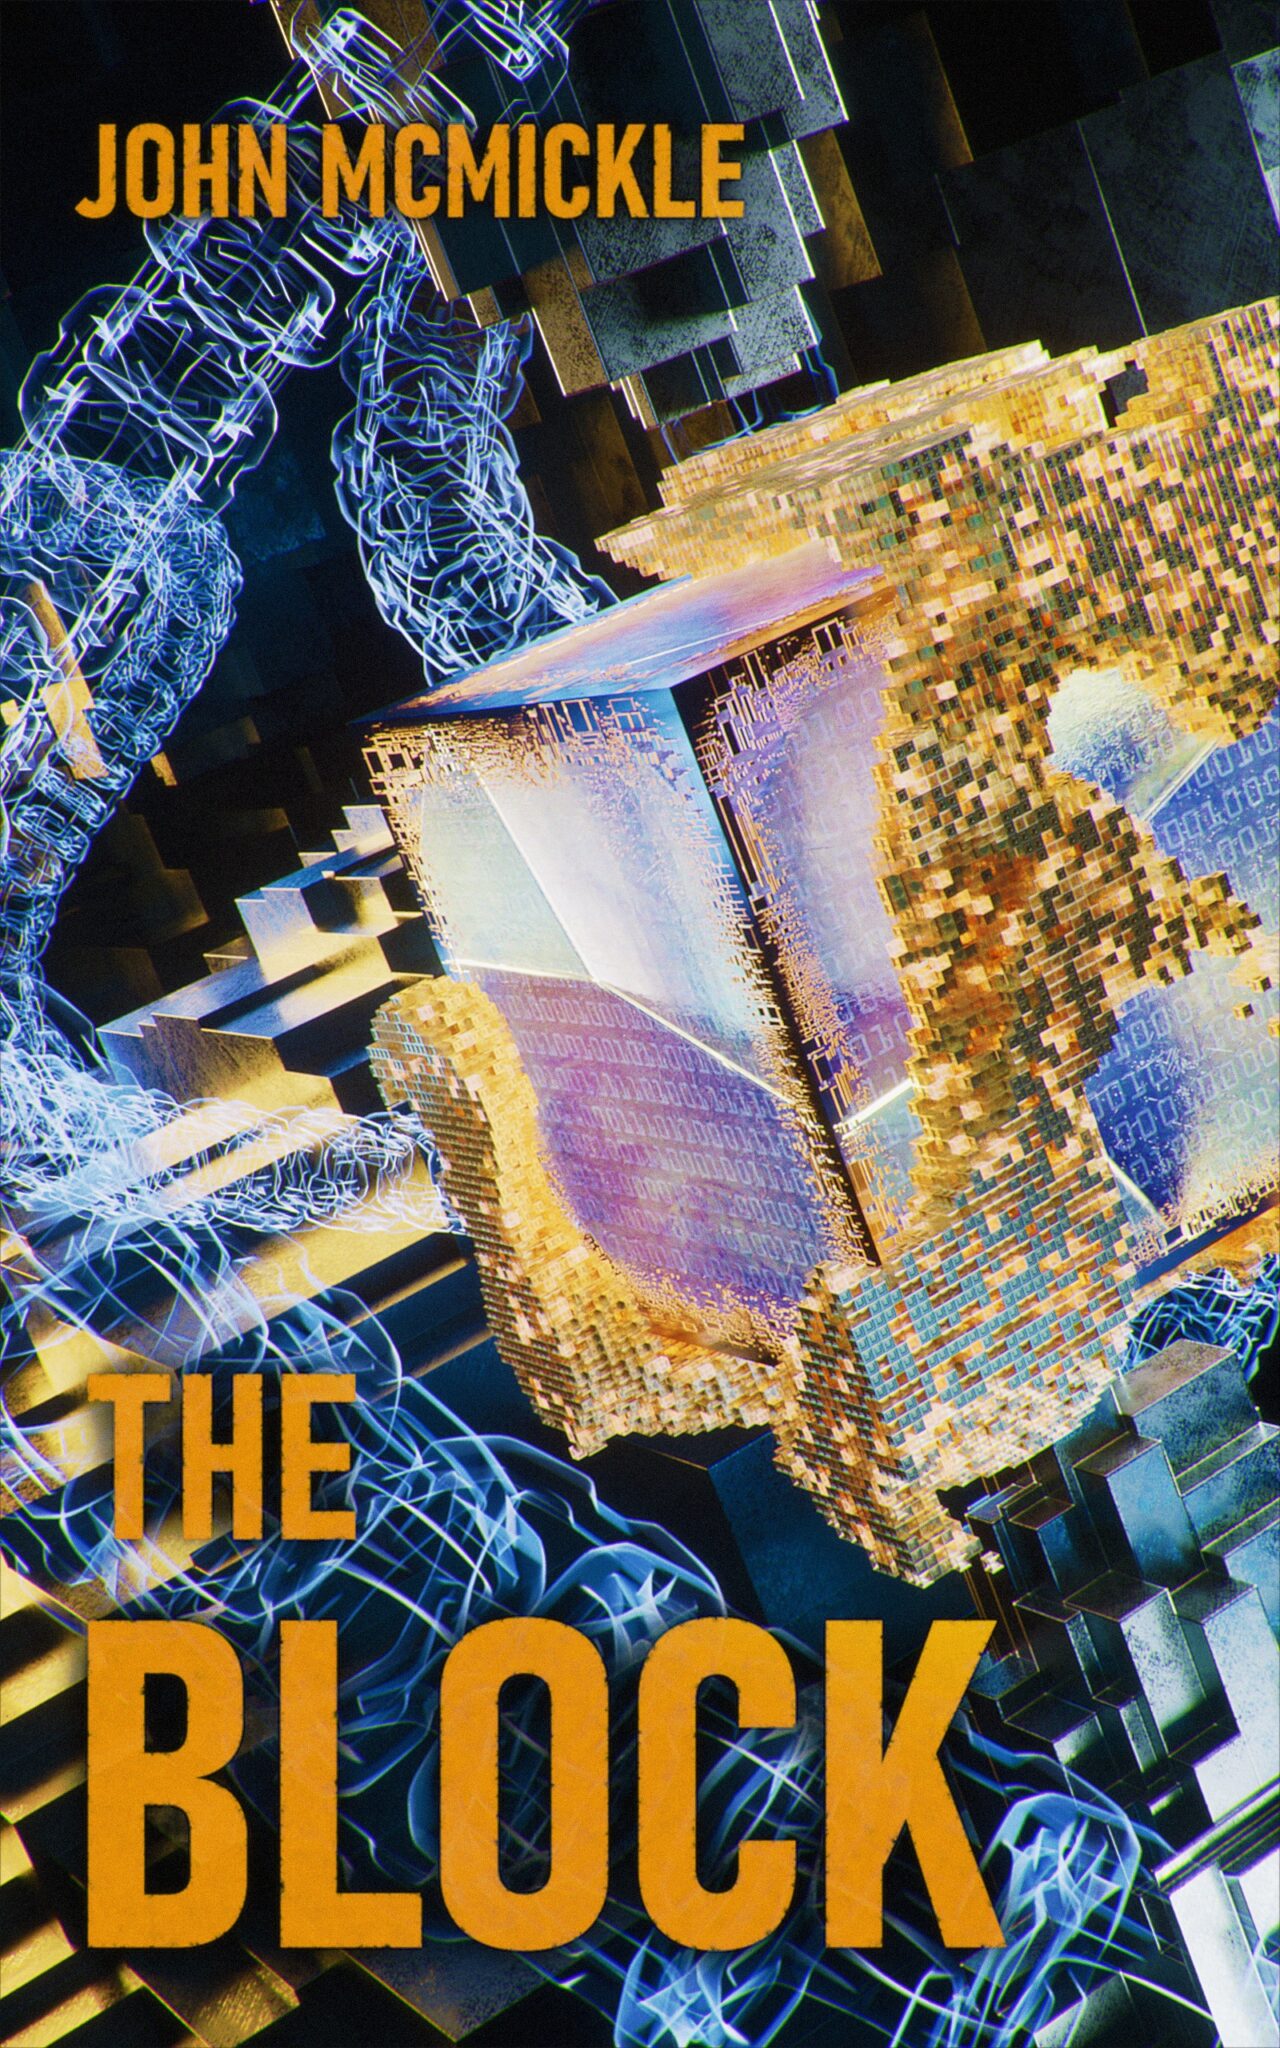 A book cover with the title " the block ".